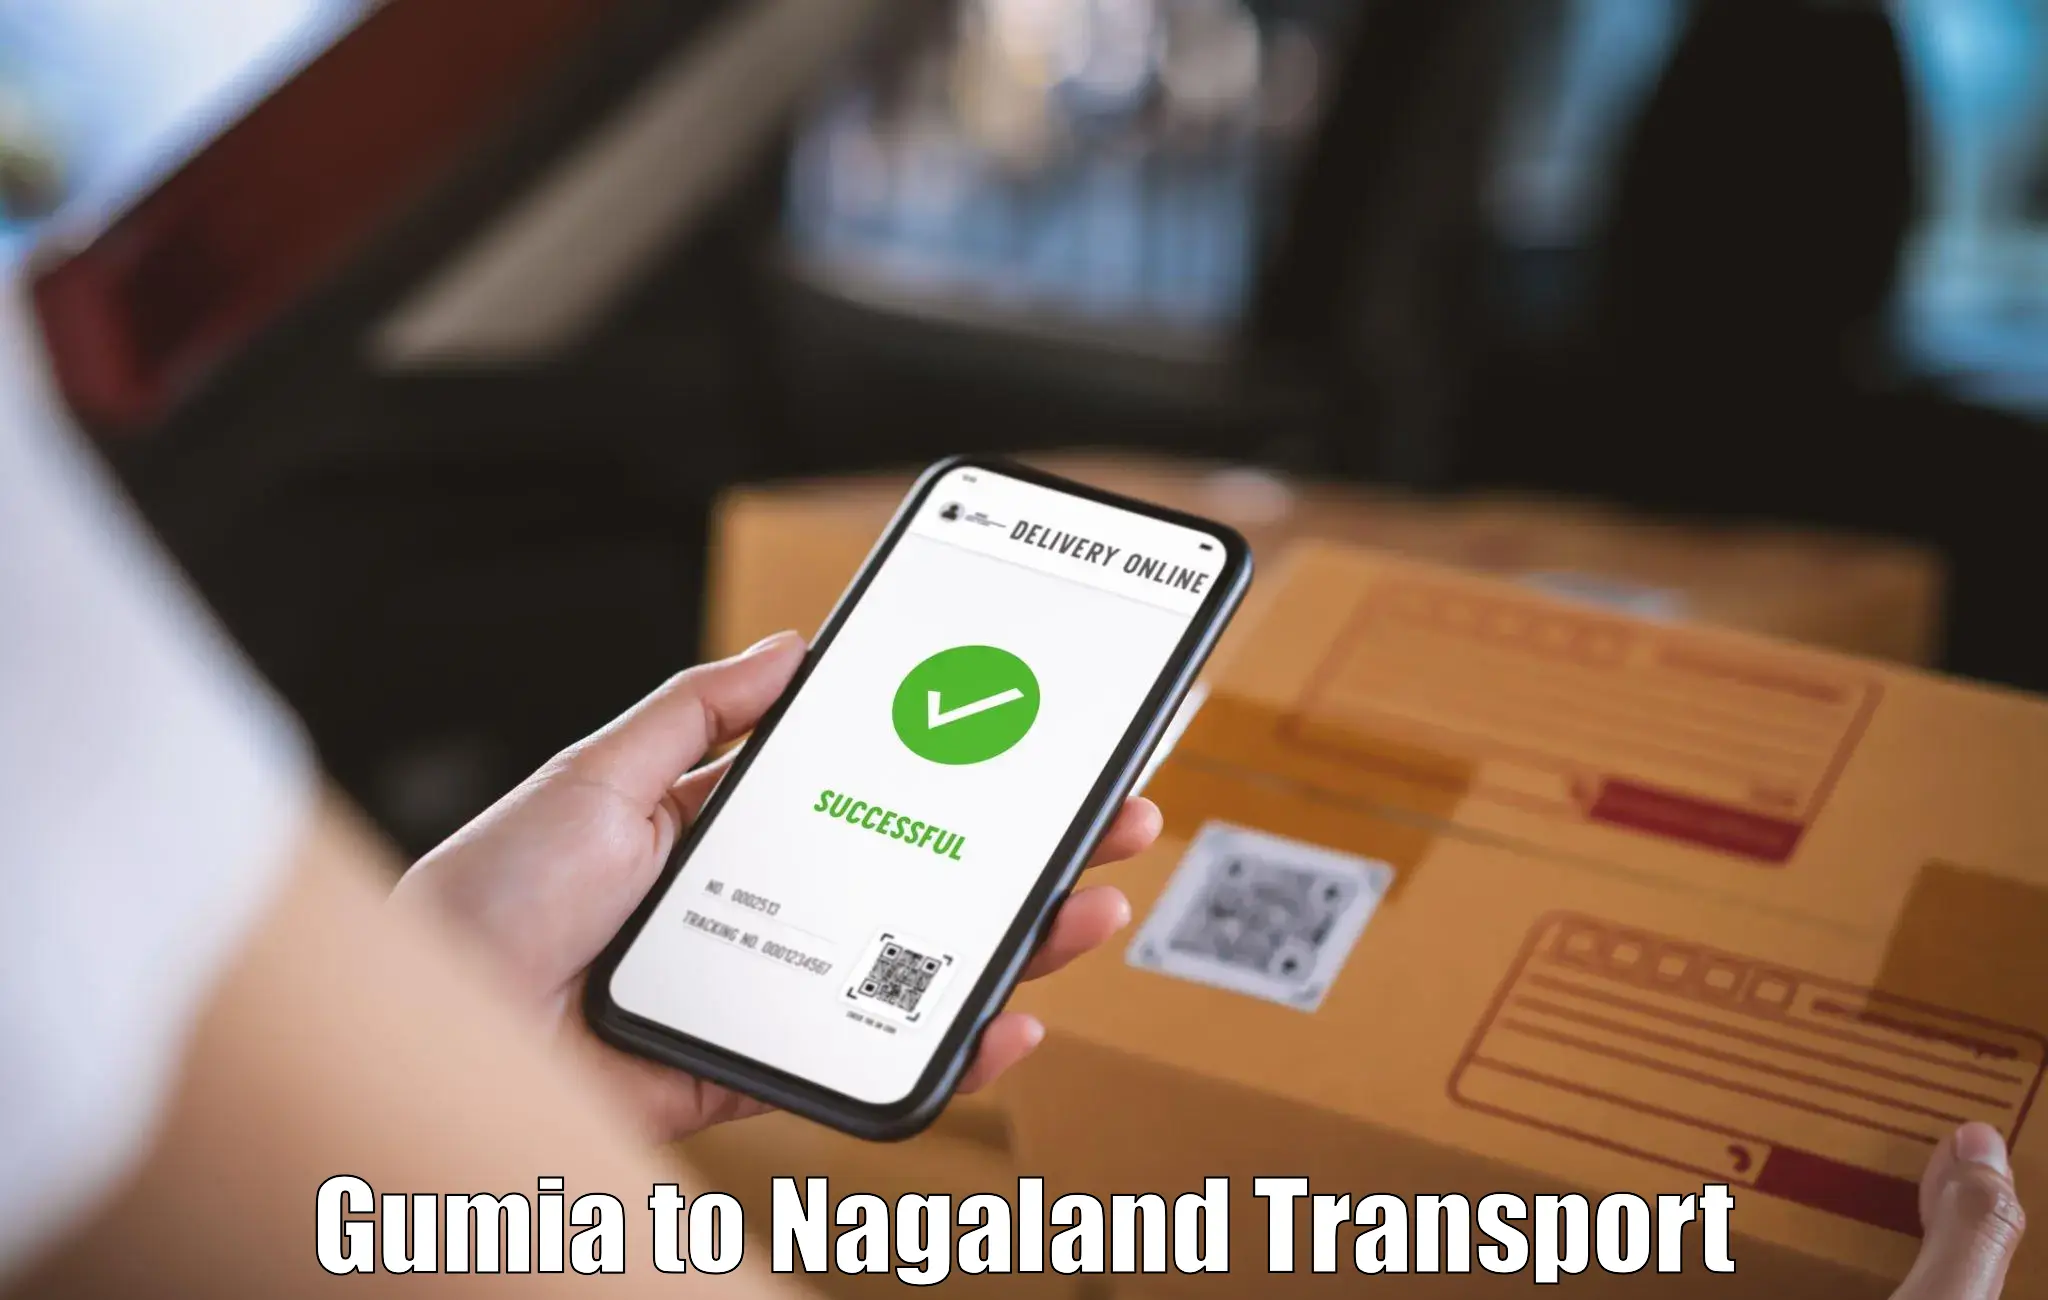 Domestic transport services Gumia to Nagaland